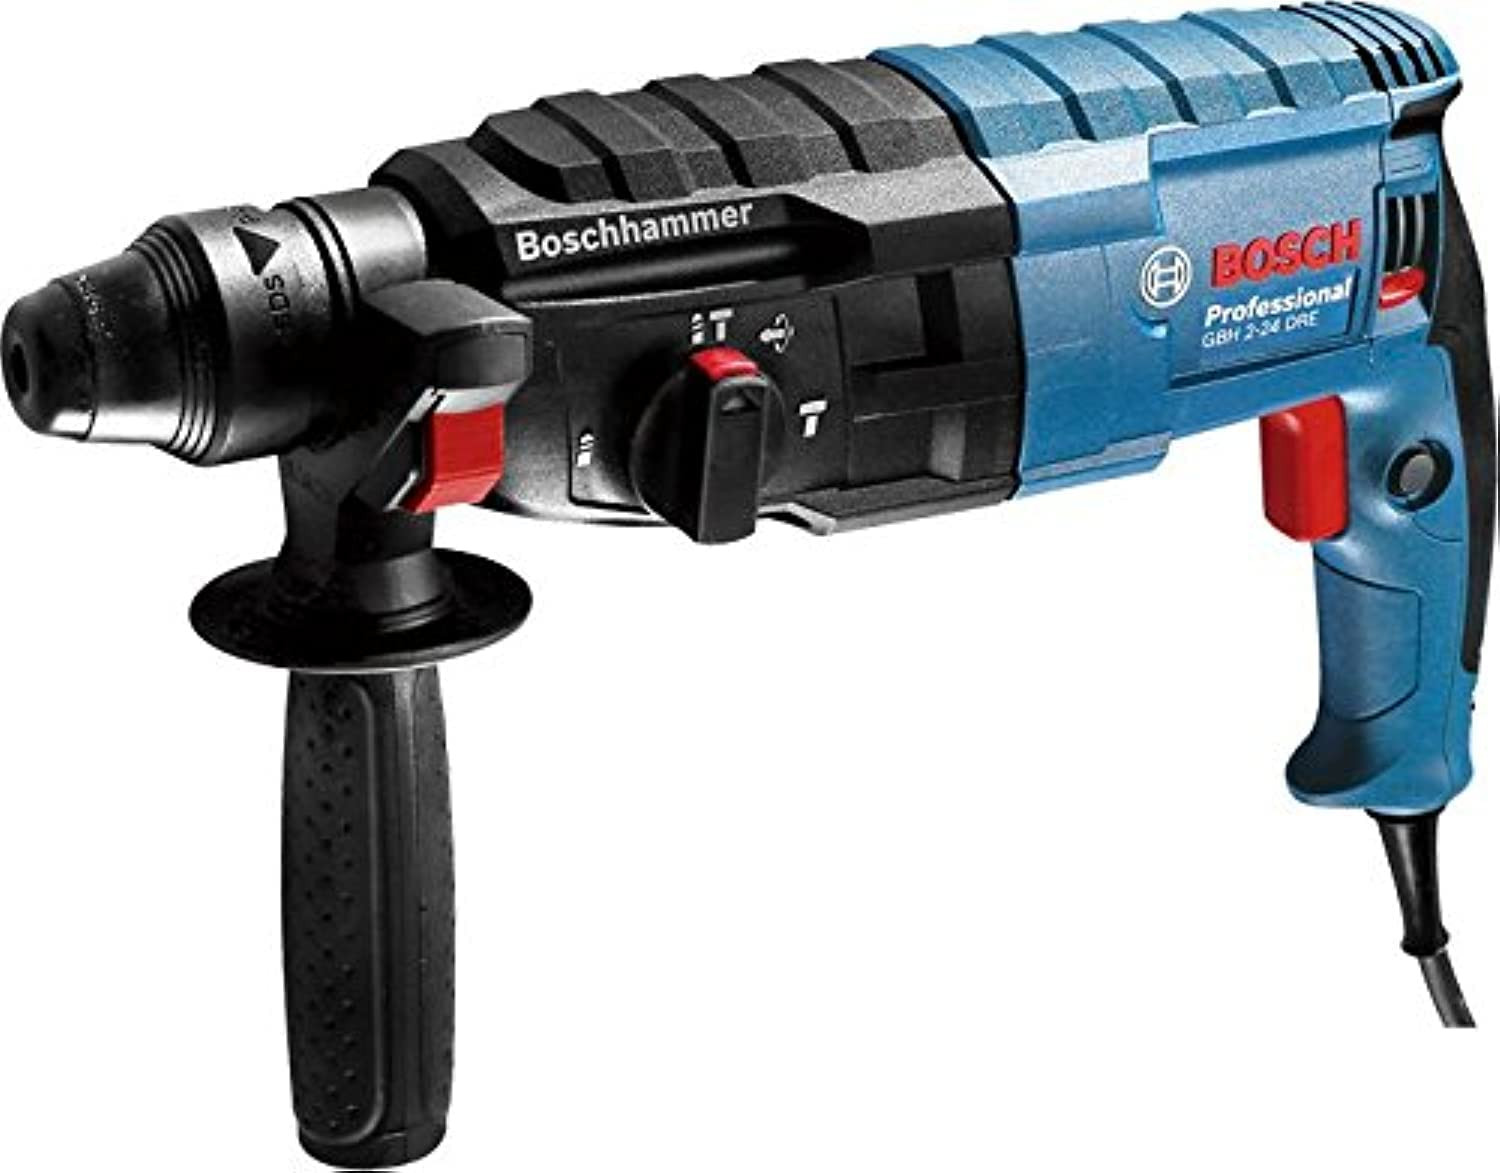 Bosch GBH 2-24 DRE Heavy Duty Corded Electric Rotary Hammer With SDS Plus, 1,300 rpm, 4,200 bpm, 790W, 2.7 J, 2.8 kg, Variable Speed, Low Vibration, 3 Modes, 1 Year Warranty